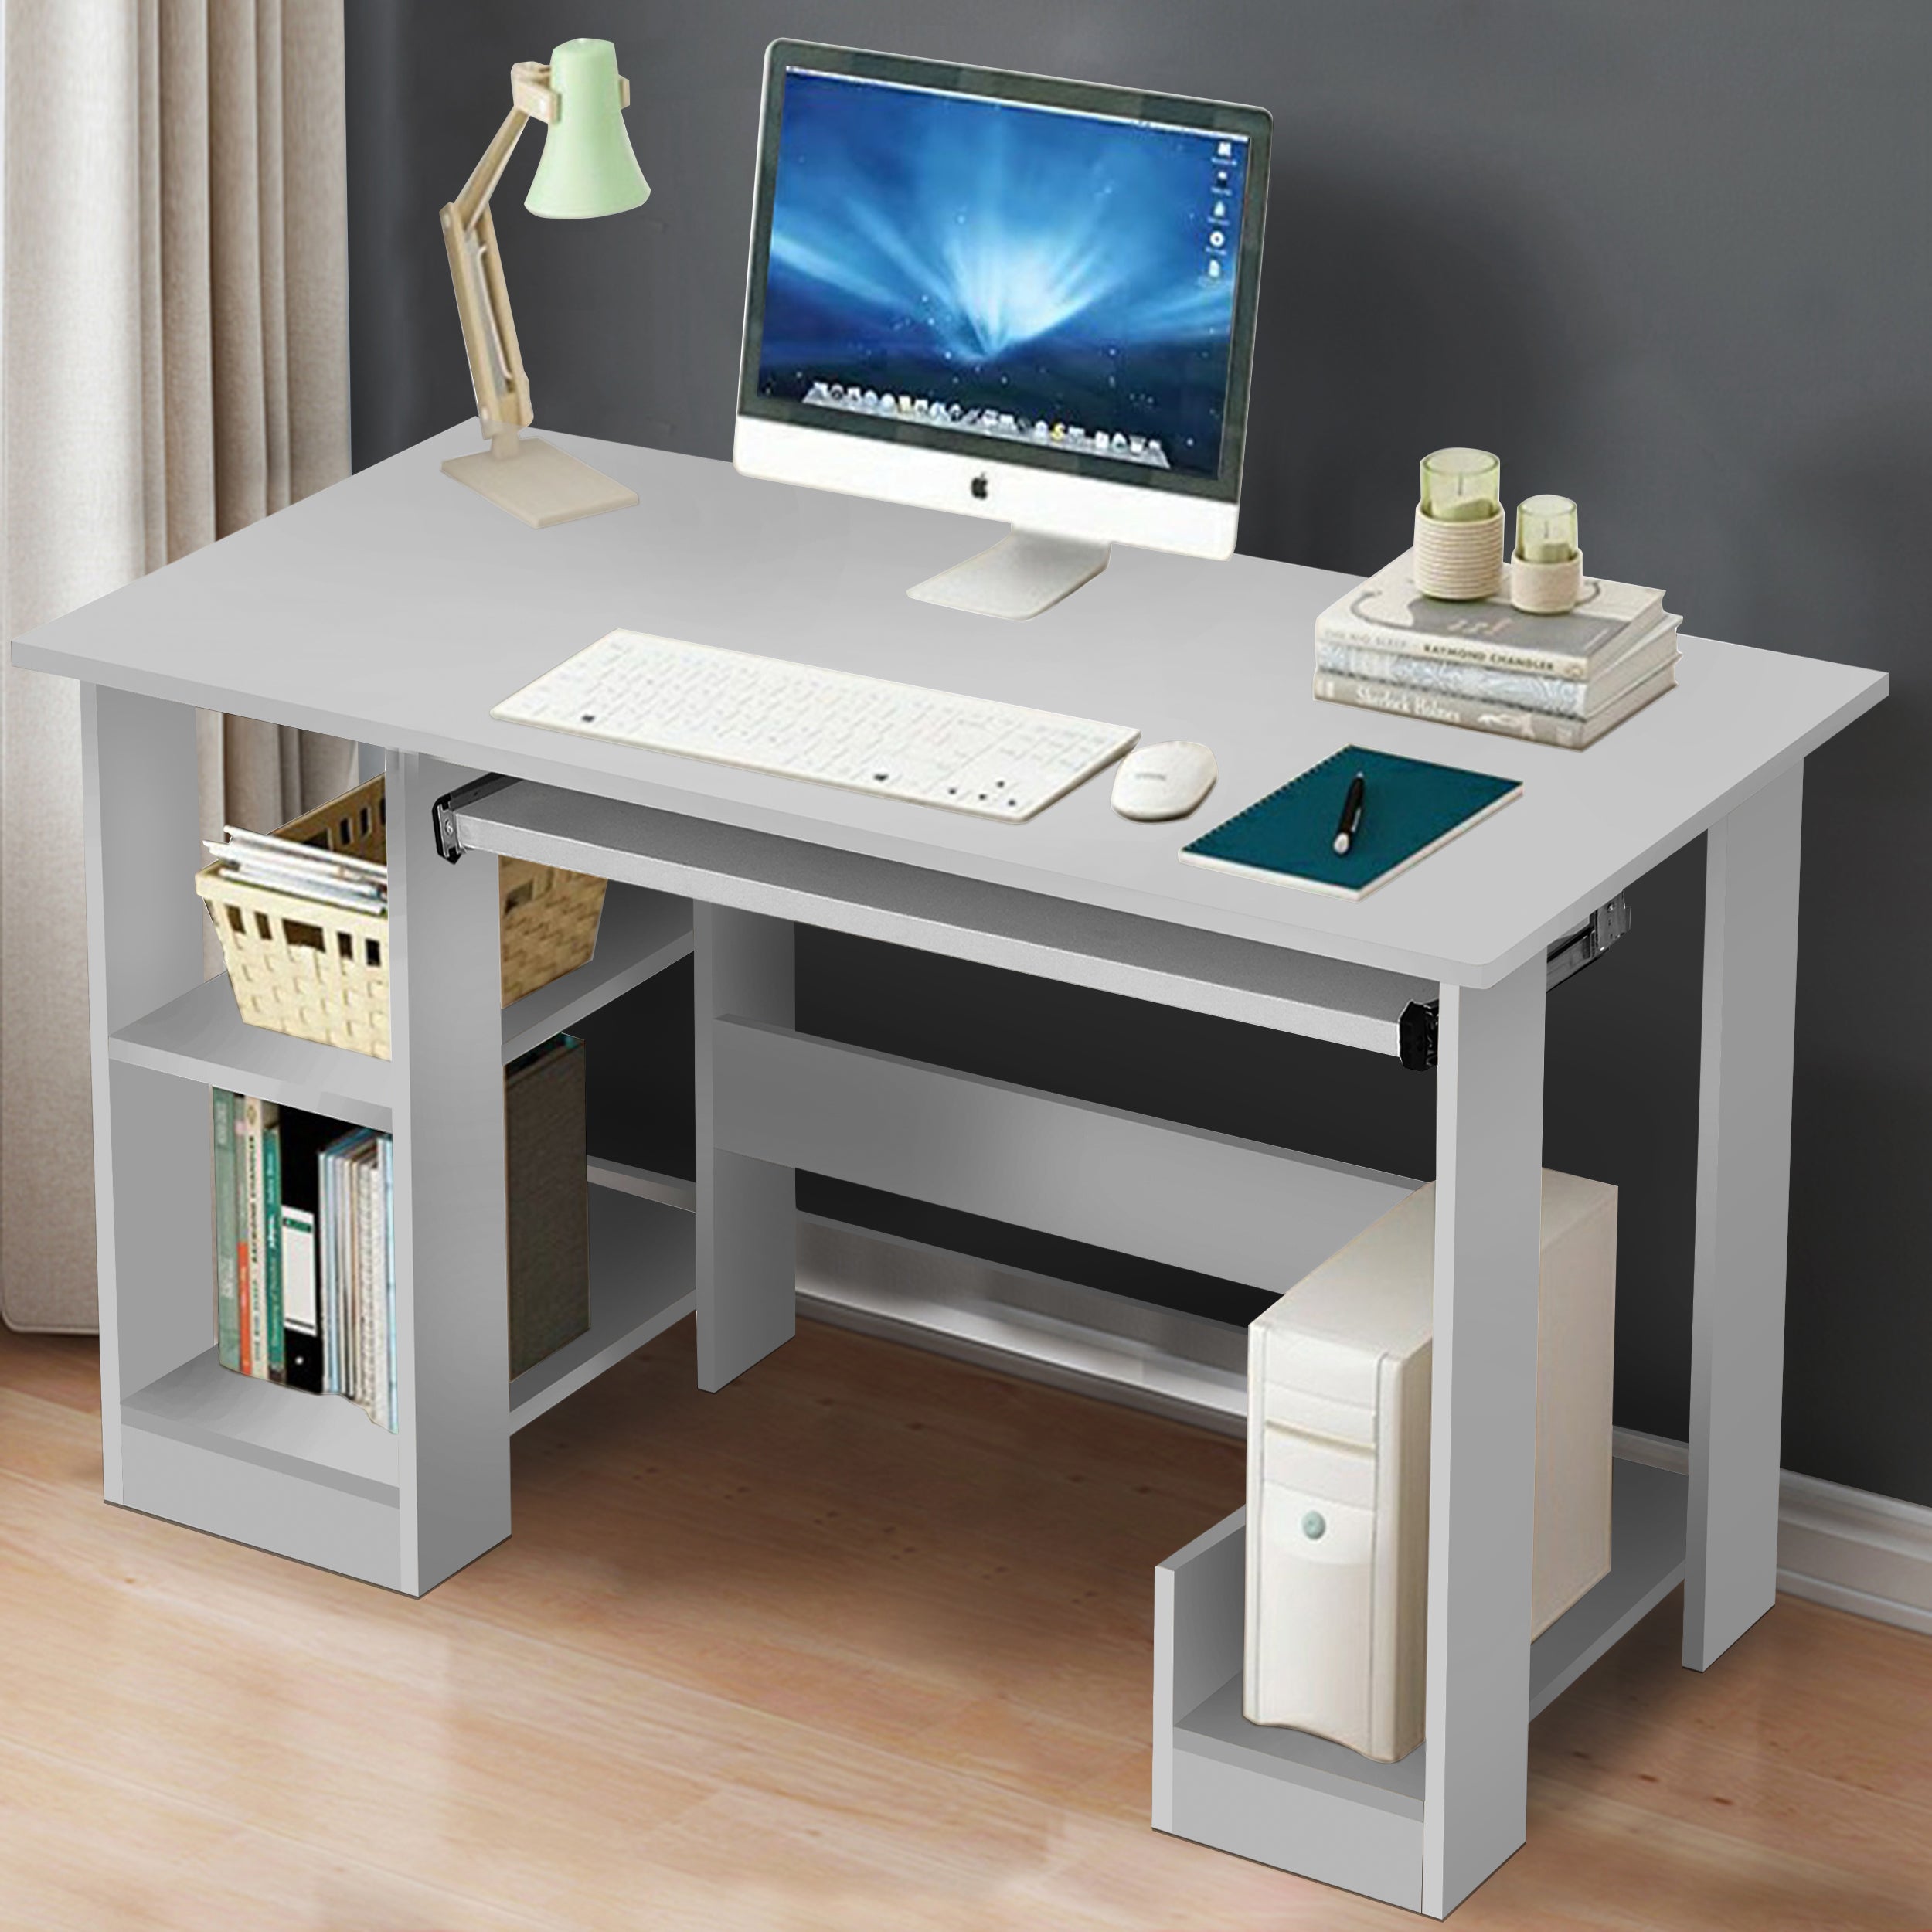 Blisswood Computer Desk: Elevate Your Workspace with Style and Functionality!